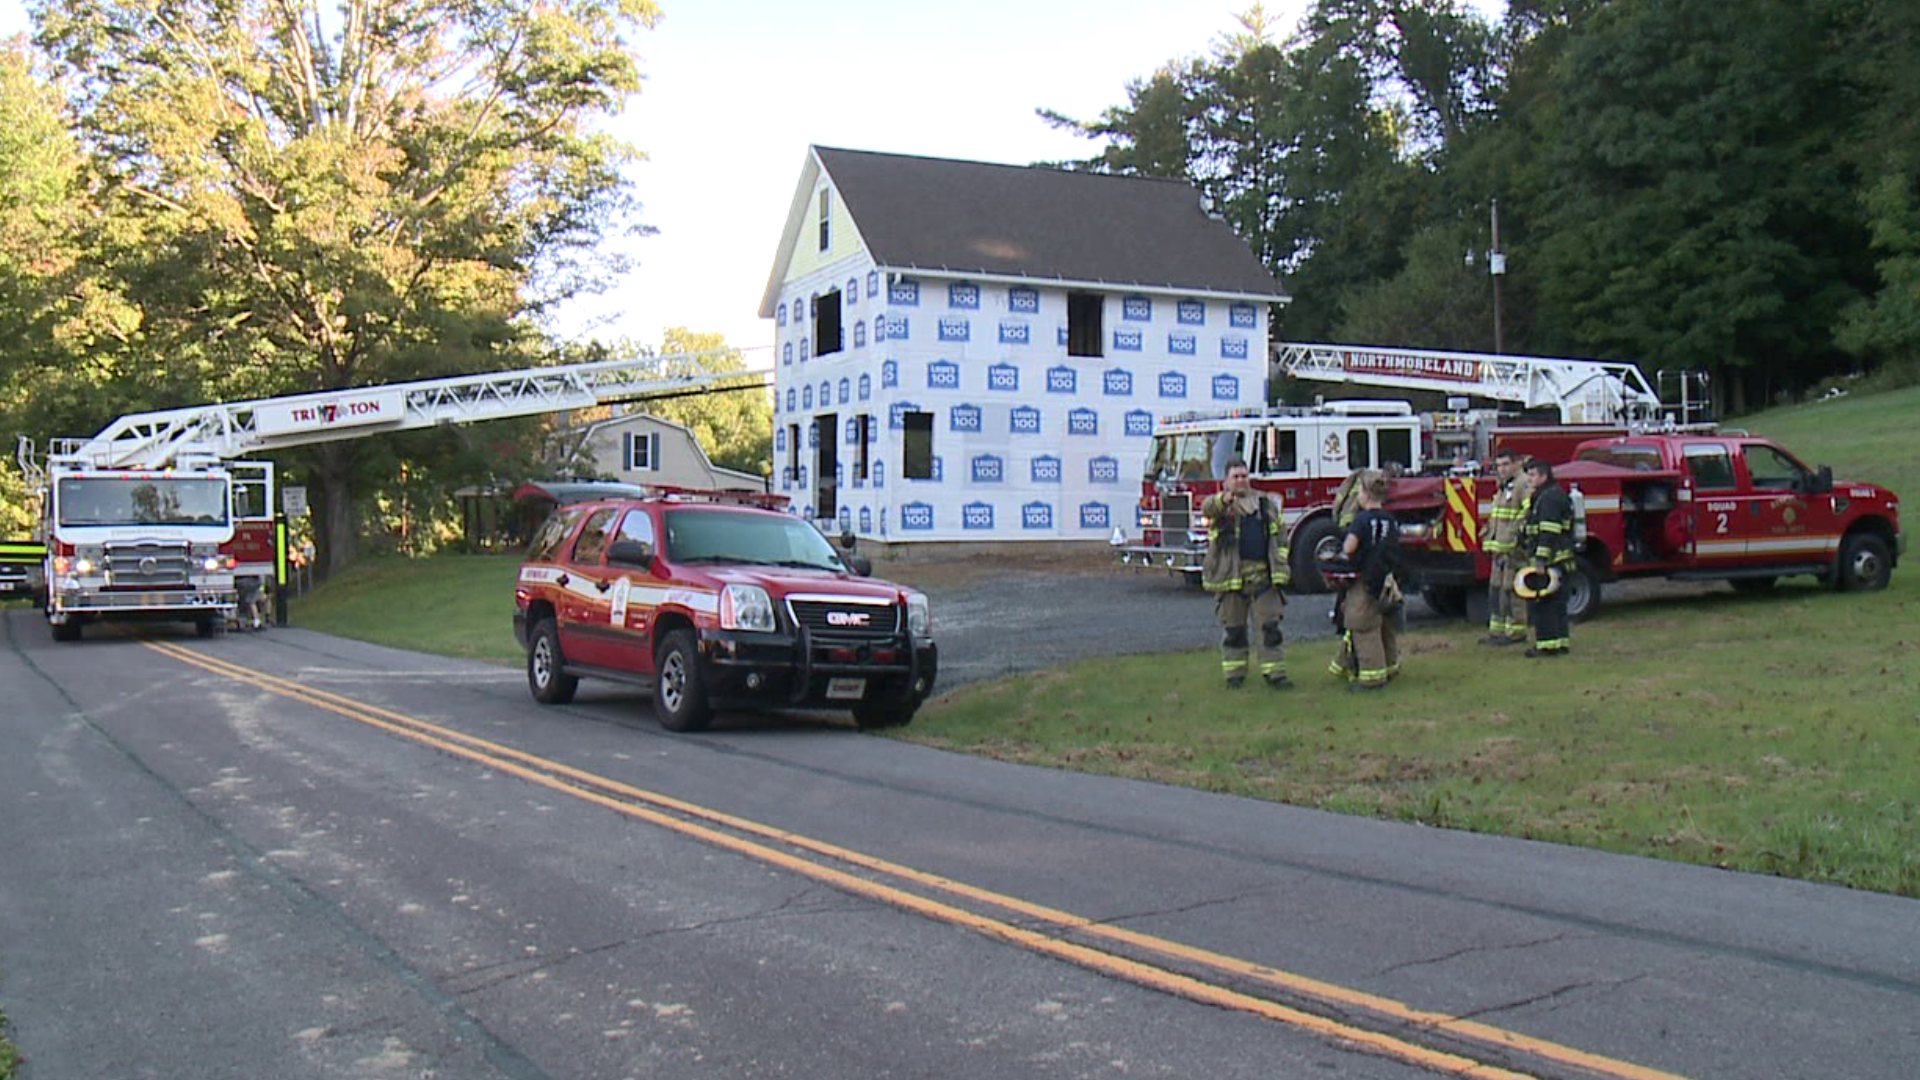 The training, attended by several departments in Luzerne County, will help prepare firefighters for if a firefighter is ever injured battling a fire.